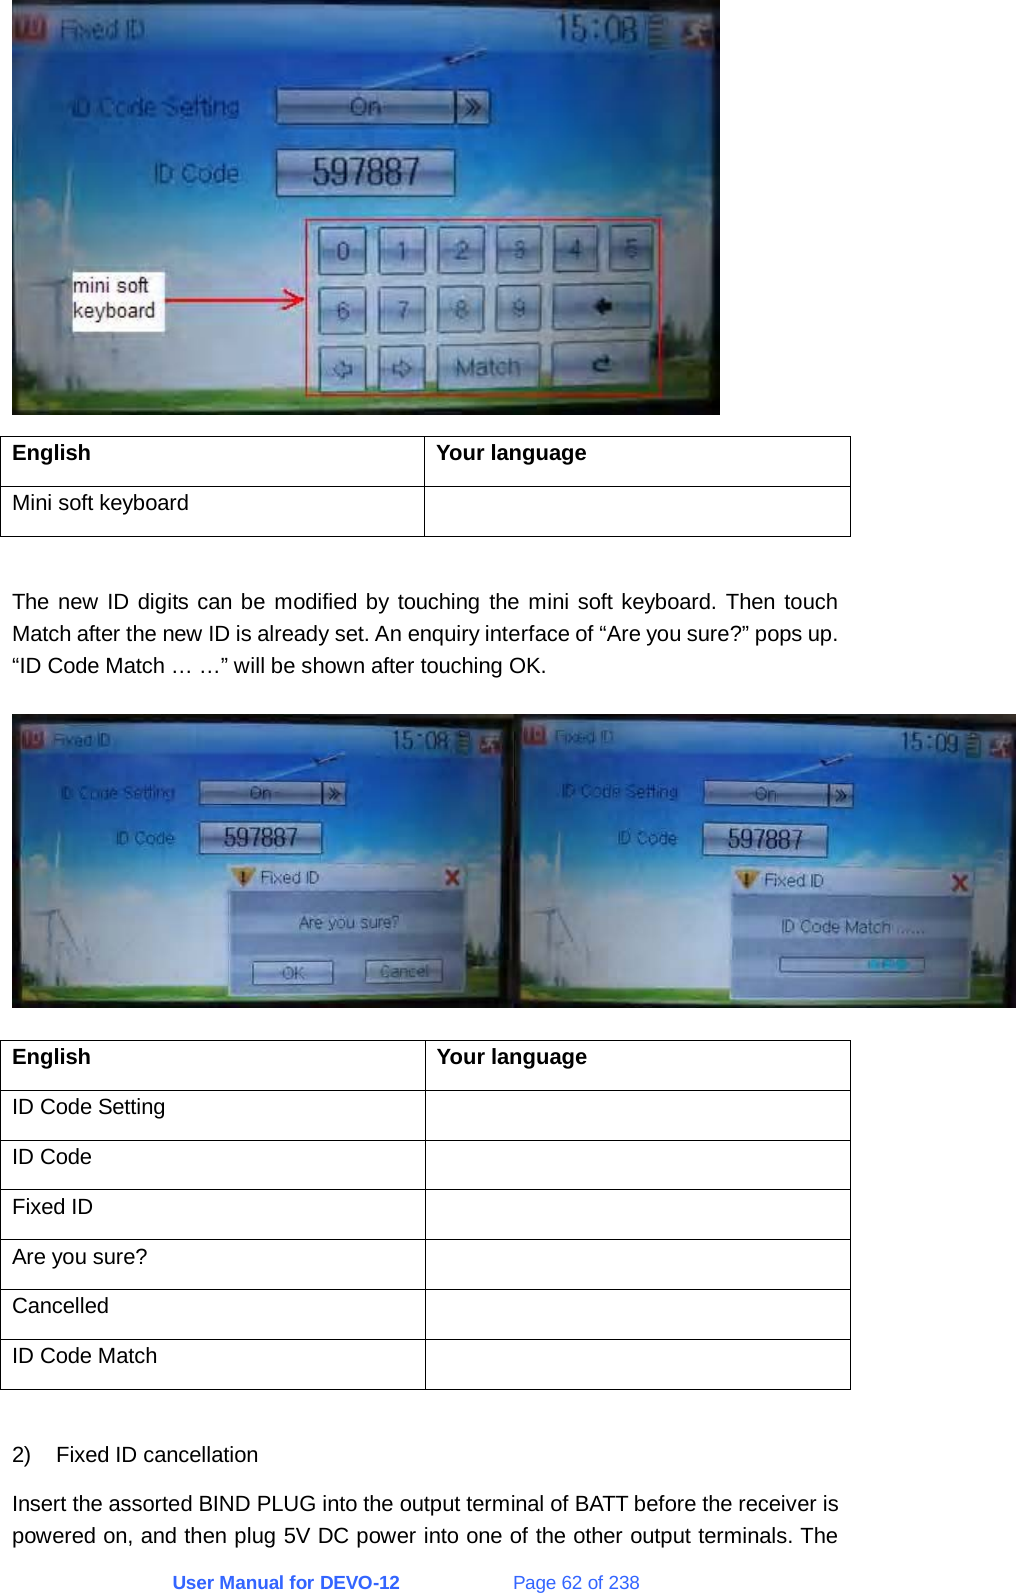 User Manual for DEVO-12             Page 62 of 238  English Your language Mini soft keyboard    The new ID digits can be modified by touching the mini soft keyboard. Then touch Match after the new ID is already set. An enquiry interface of “Are you sure?” pops up. “ID Code Match … …” will be shown after touching OK.  English Your language ID Code Setting   ID Code   Fixed ID   Are you sure?   Cancelled  ID Code Match    2)  Fixed ID cancellation Insert the assorted BIND PLUG into the output terminal of BATT before the receiver is powered on, and then plug 5V DC power into one of the other output terminals. The 